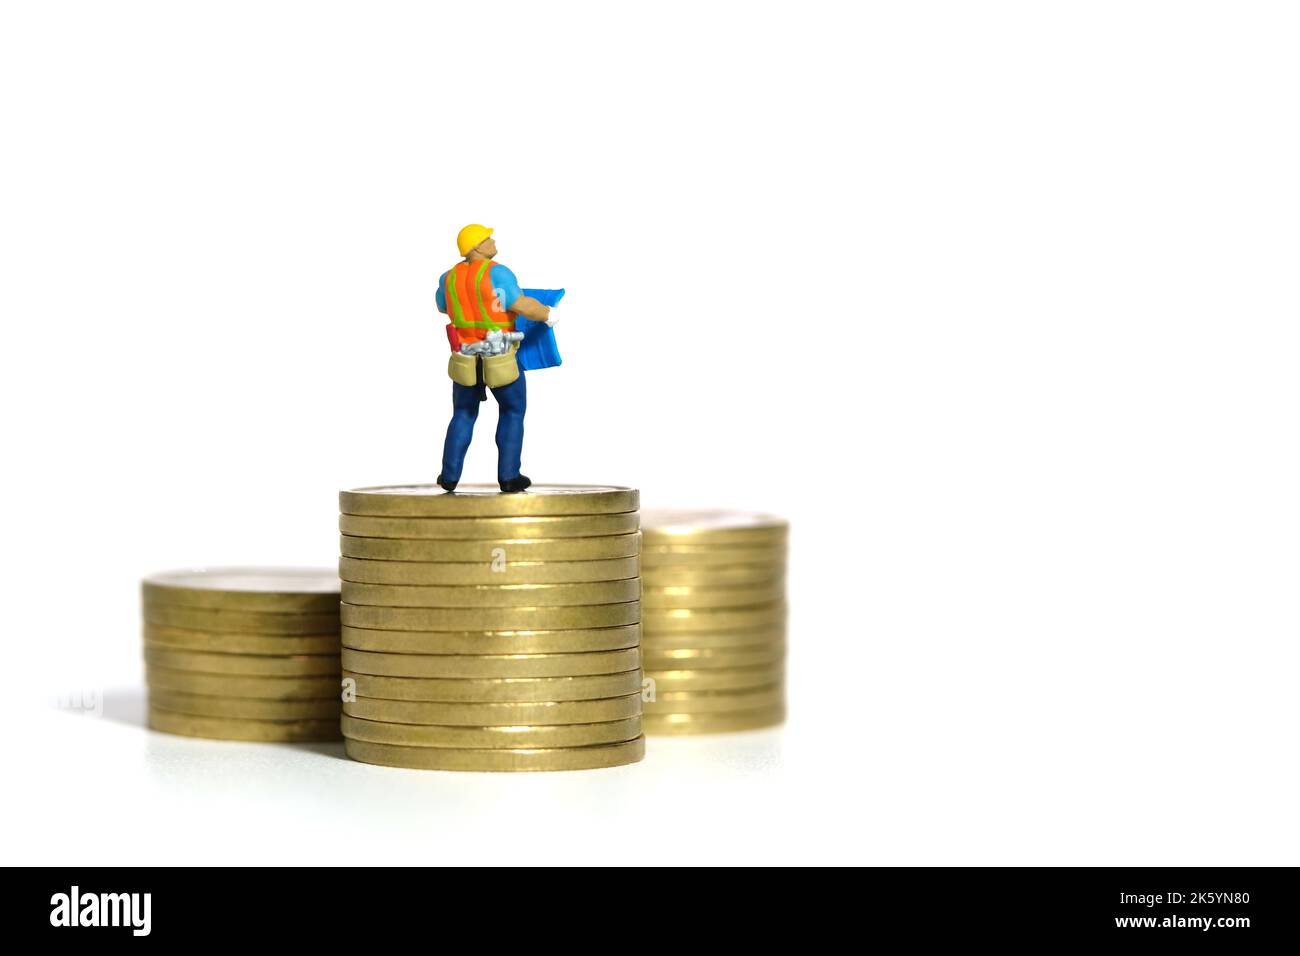 Miniature people toy figure photography. Project budget concept. A construction worker with blueprint building standing above golden coin money pile. Stock Photo